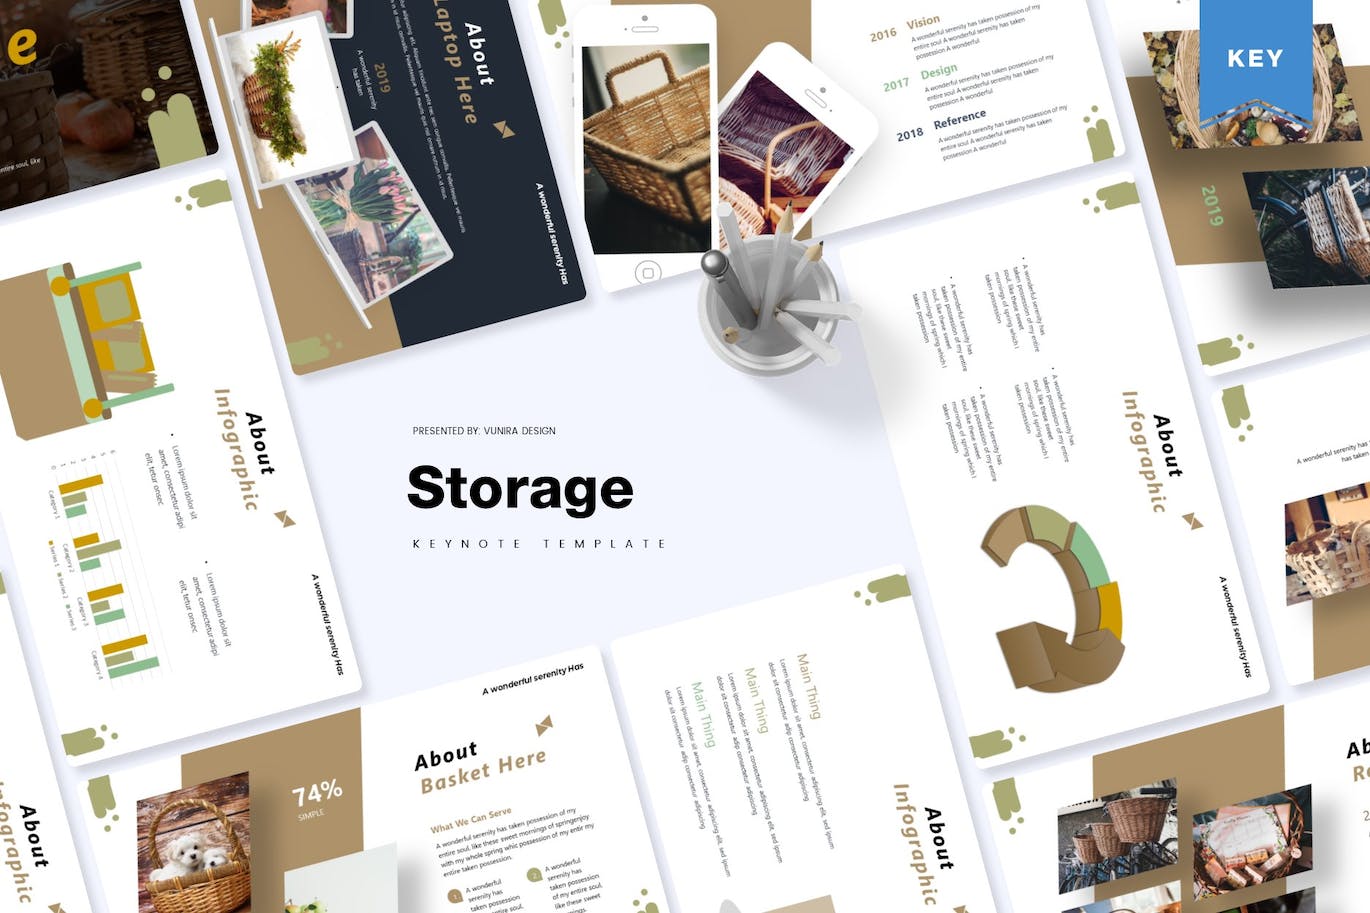 Pack of images of amazing presentation template slides.